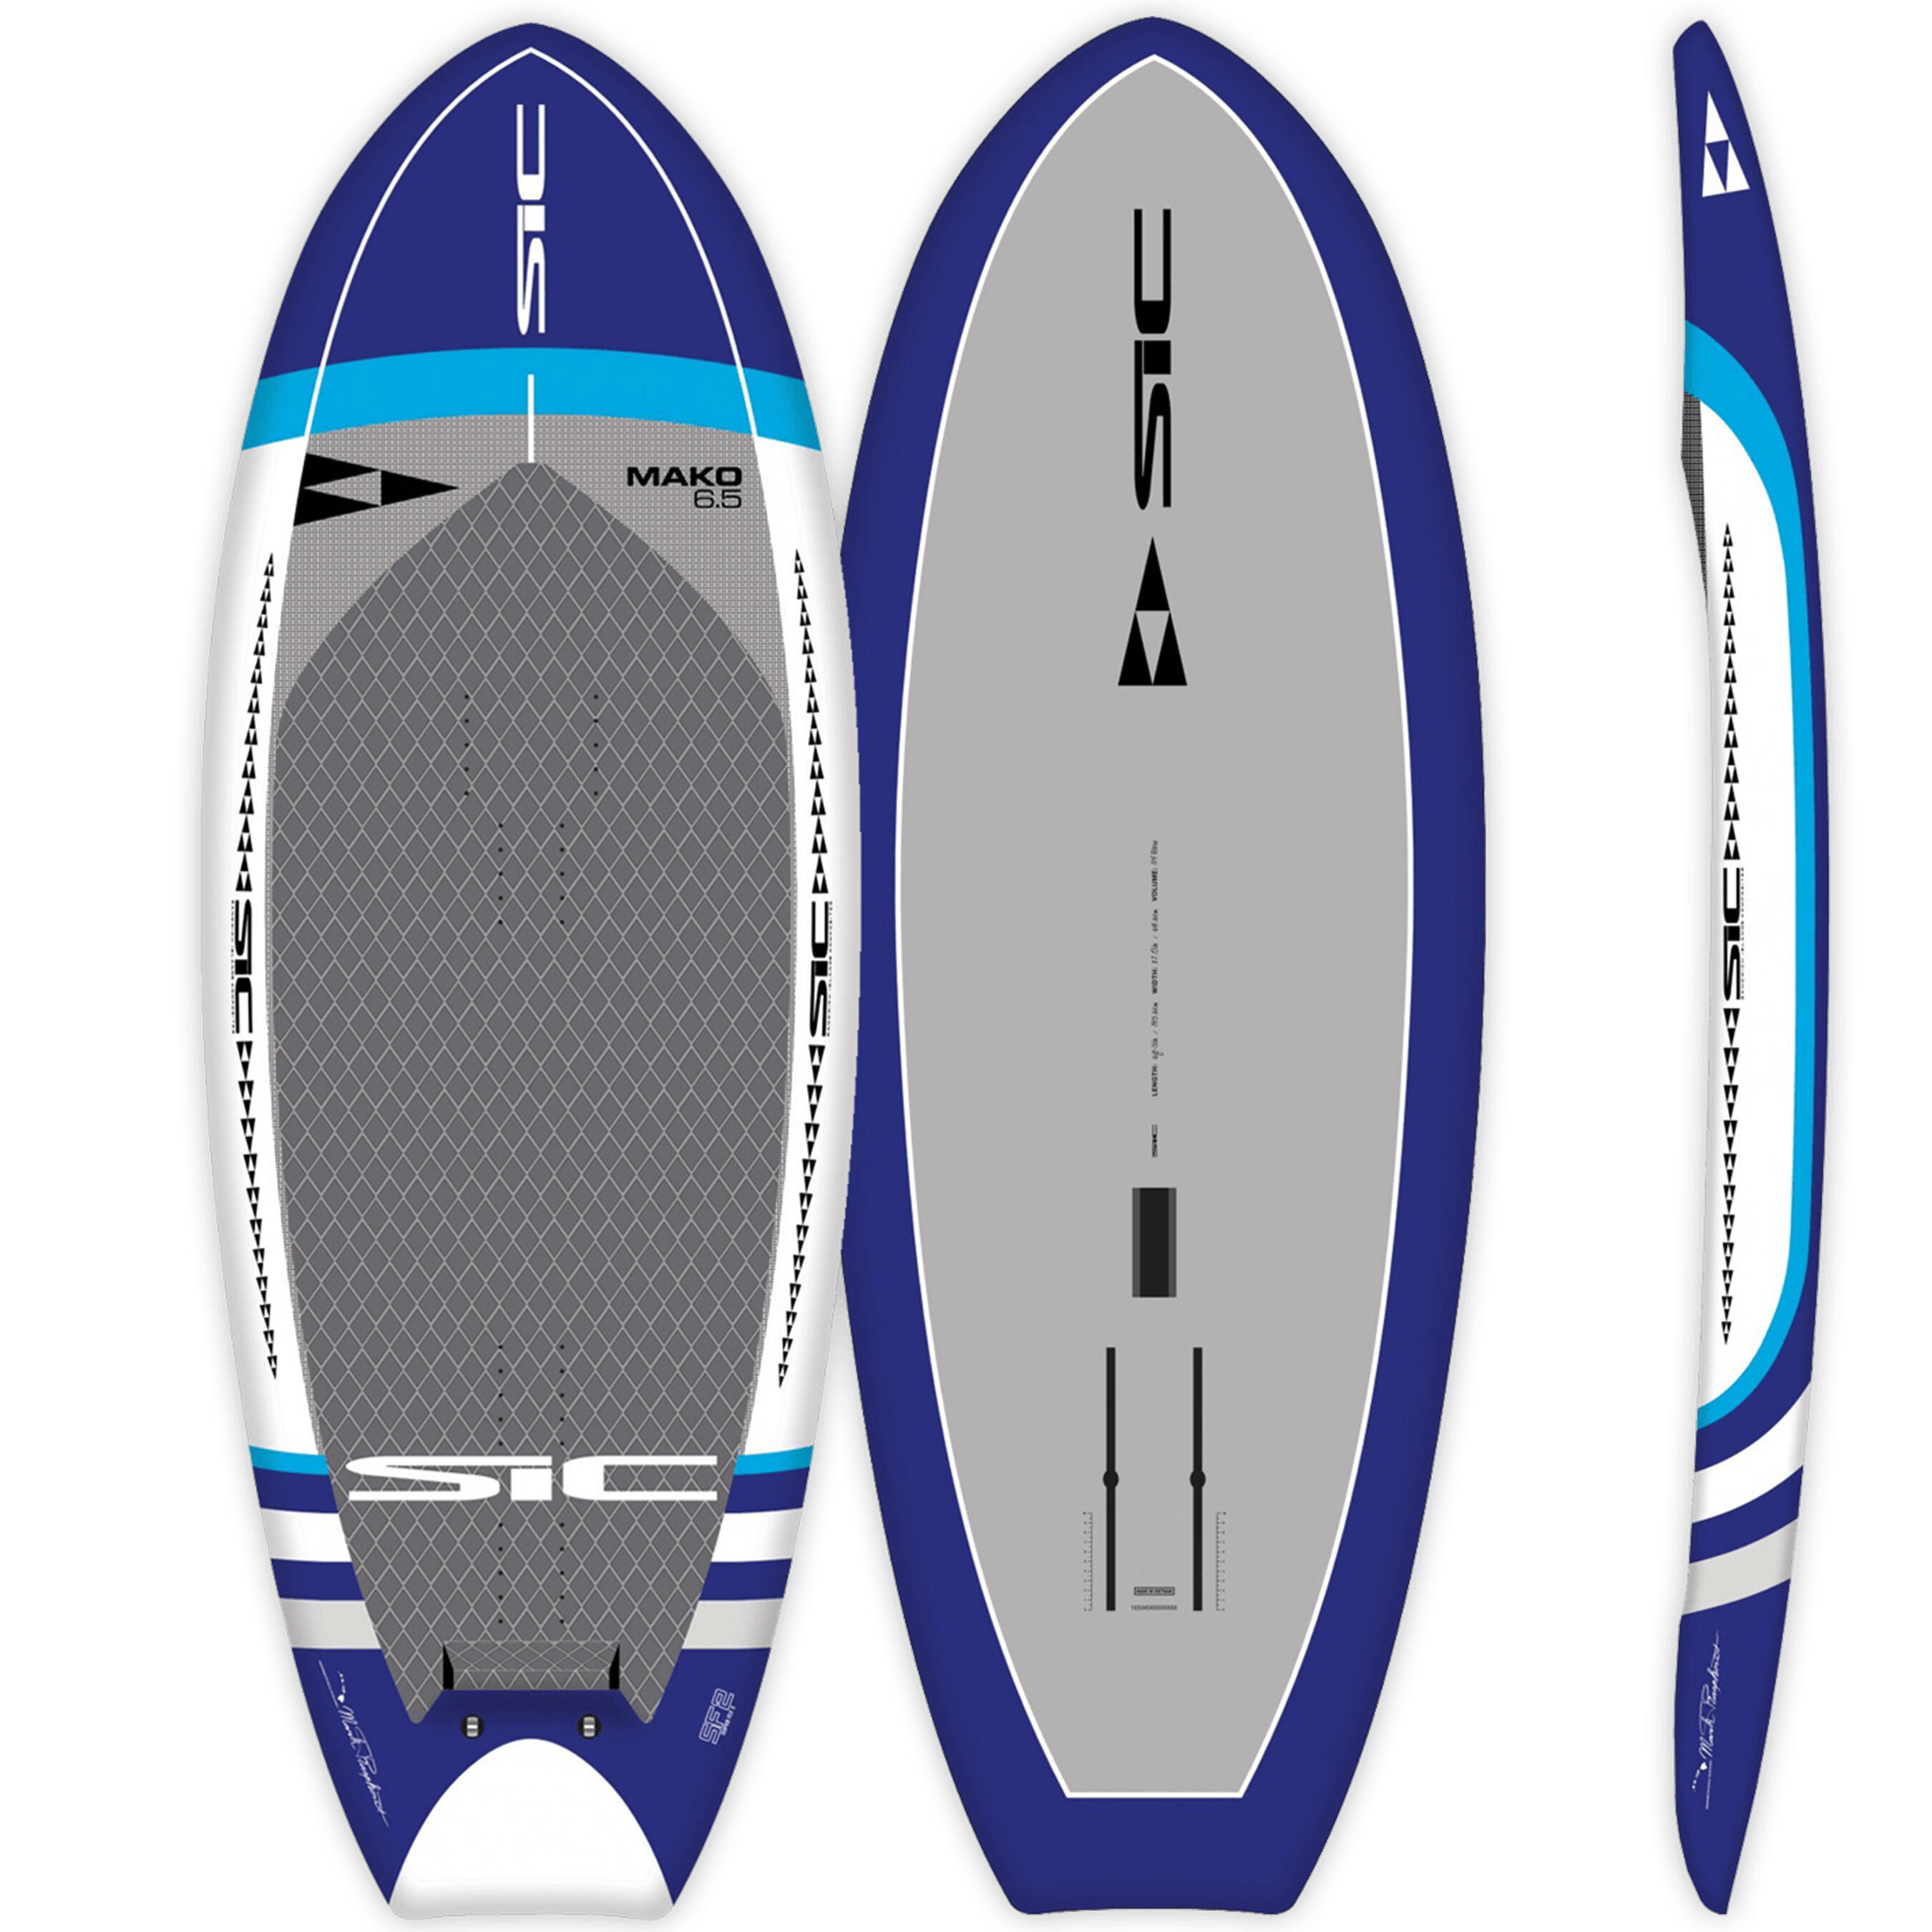 STAND UP PADDLE SURF WING FOIL SIC MAKO 6.5 x 27.0 decathlon.ro imagine 2022